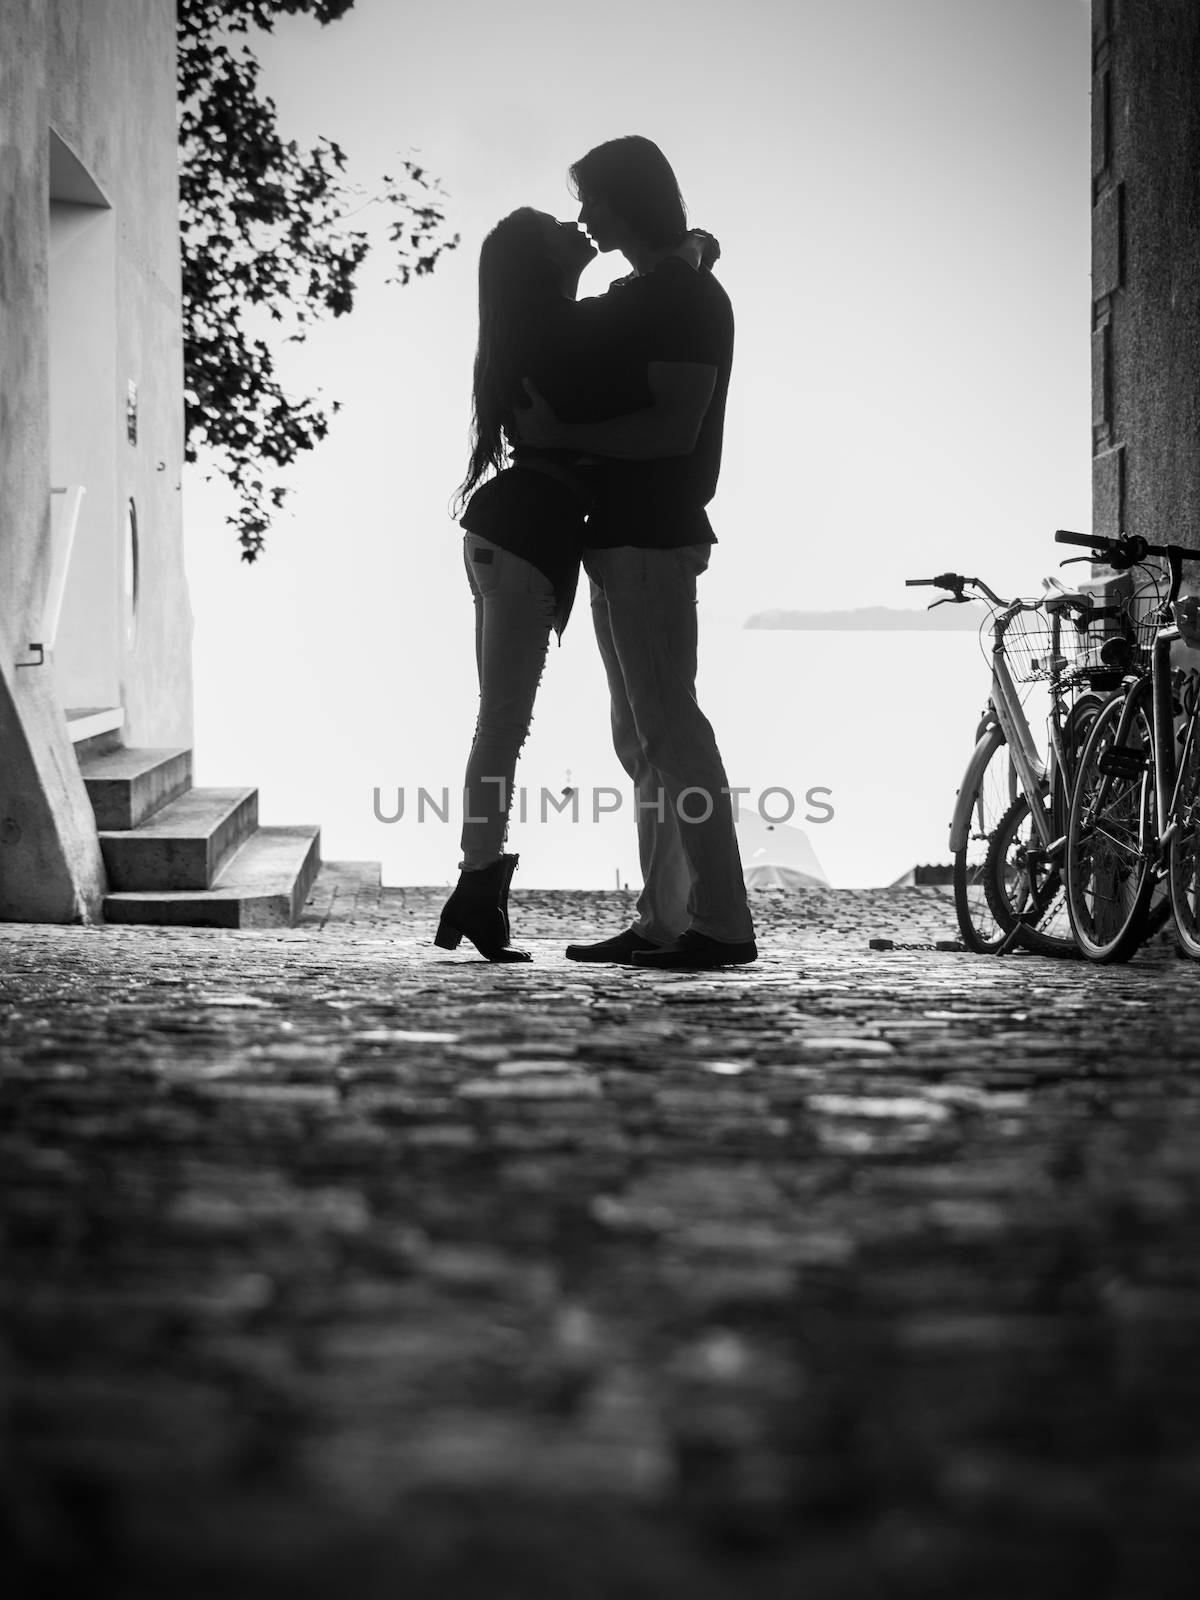 Photo of a young woman and man embracing and kissing in an alley.  Slight grain visible.